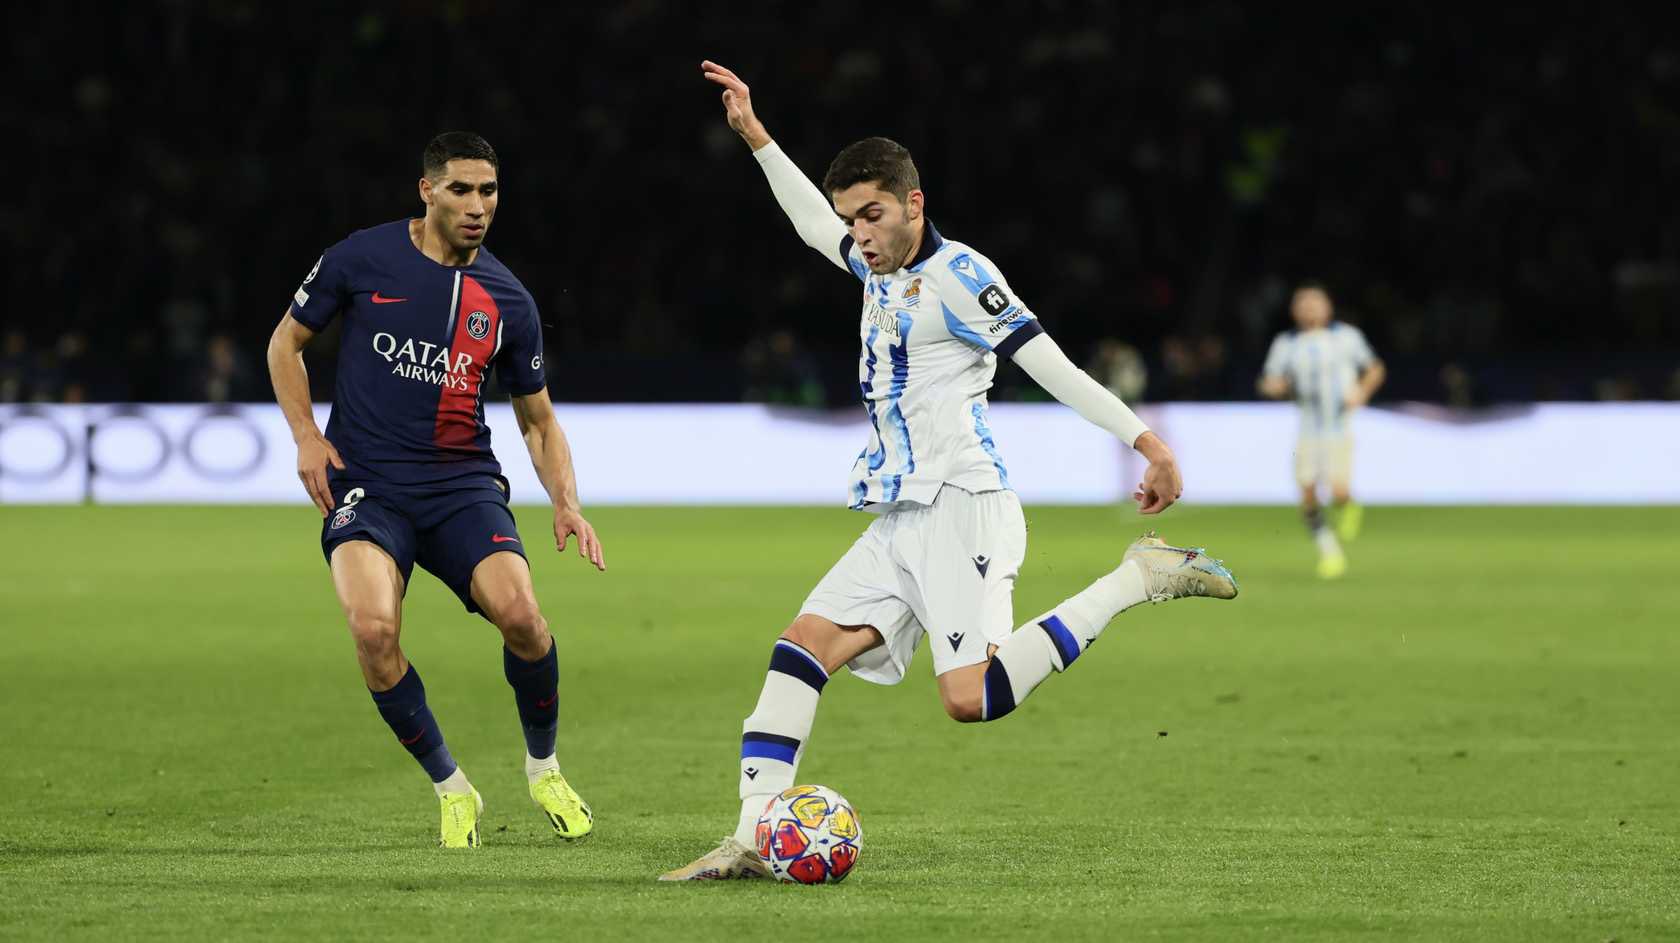 Real Sociedad’s Champions League hopes hanging by a thread after first leg defeat to Paris Saint-Germain